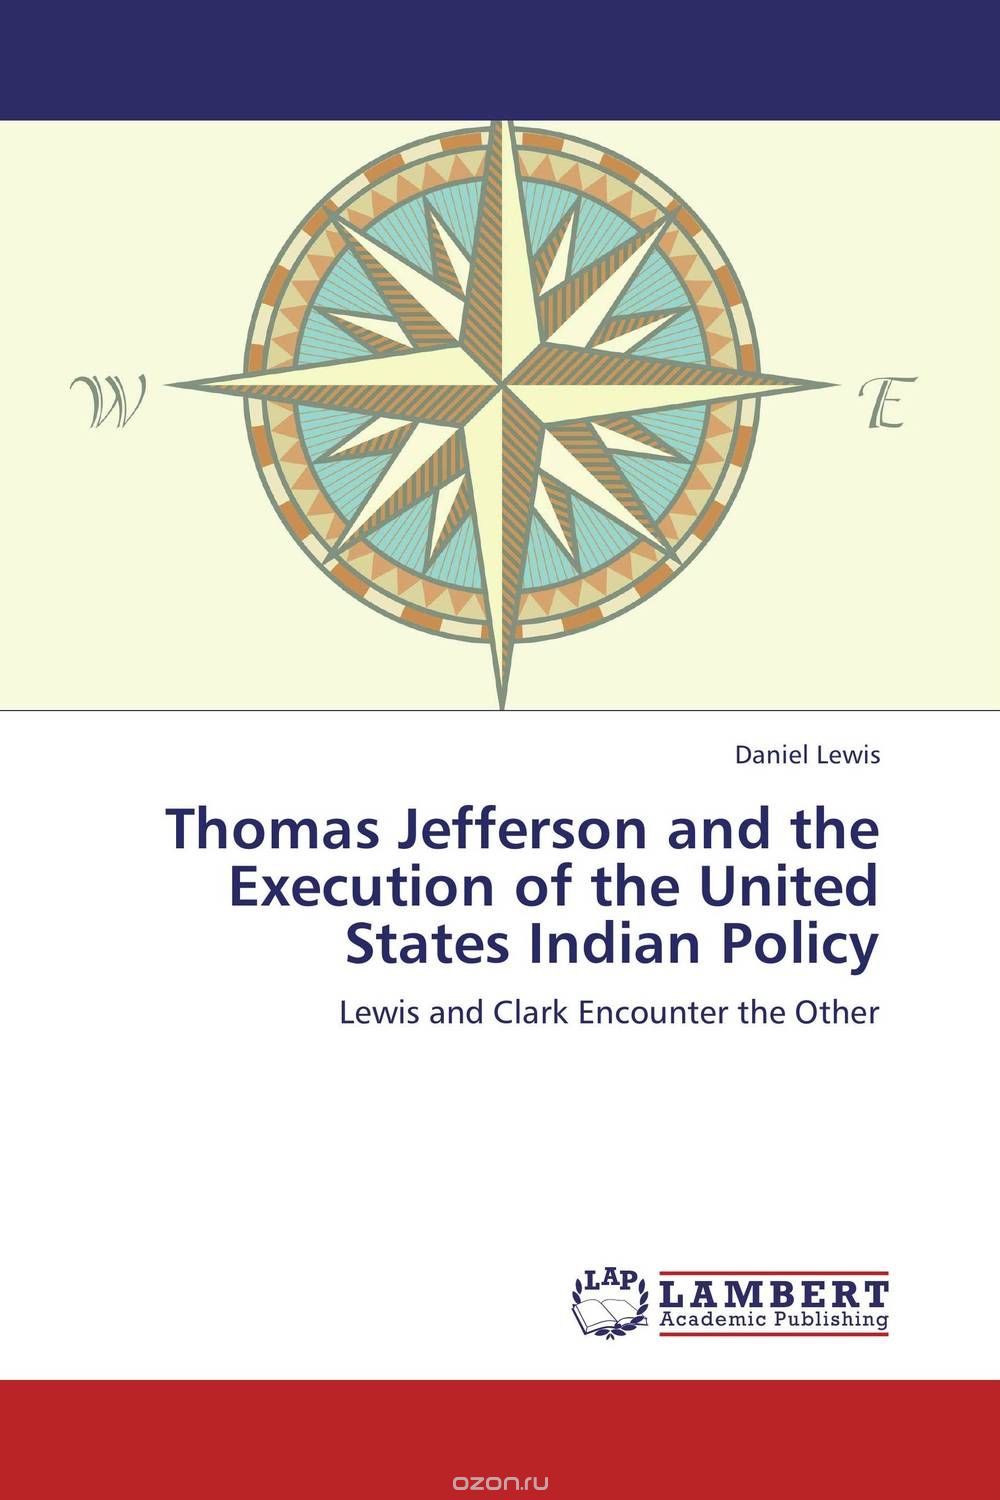 Скачать книгу "Thomas Jefferson and the Execution of the United States Indian Policy"